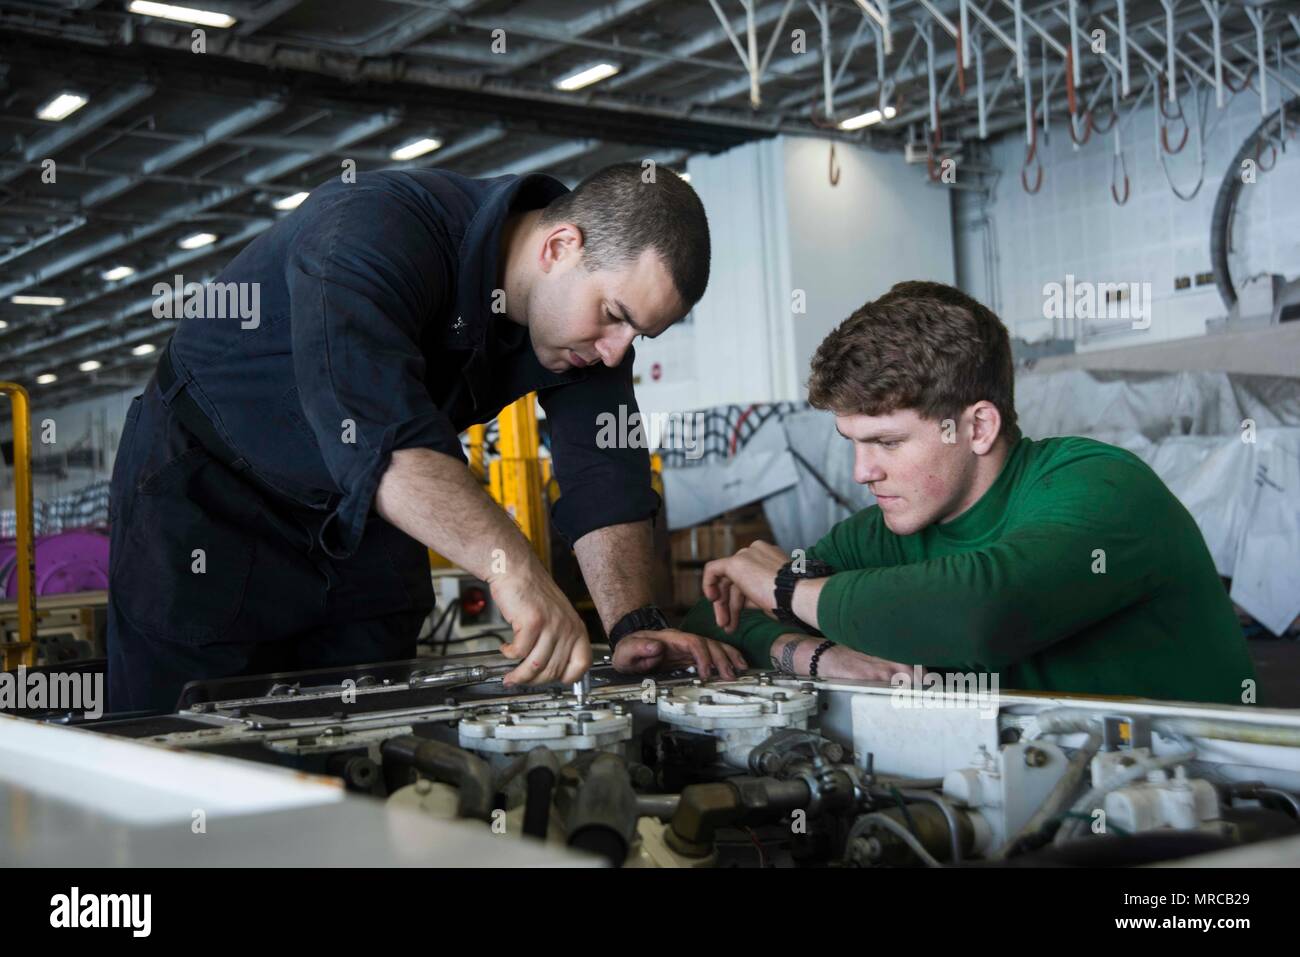 170604-N-KJ380-028  ATLANTIC OCEAN (June 4, 2017) Aviation Support Equipment Technician 3rd Class Ryan Rios, left, from Fresno, Calif., and Aviation Support Equipment Technician Airman Zane Bradbury, from Charlestown, W.Va., perform maintenance on a spotting dolly in the hangar bay of the aircraft carrier USS Dwight D. Eisenhower (CVN 69) (Ike). Ike is currently conducting aircraft carrier qualifications during the sustainment phase of the Optimized Fleet Response Plan (OFRP). (U.S. Navy photo by Mass Communication Specialist Seaman Neo B. Greene III) Stock Photo